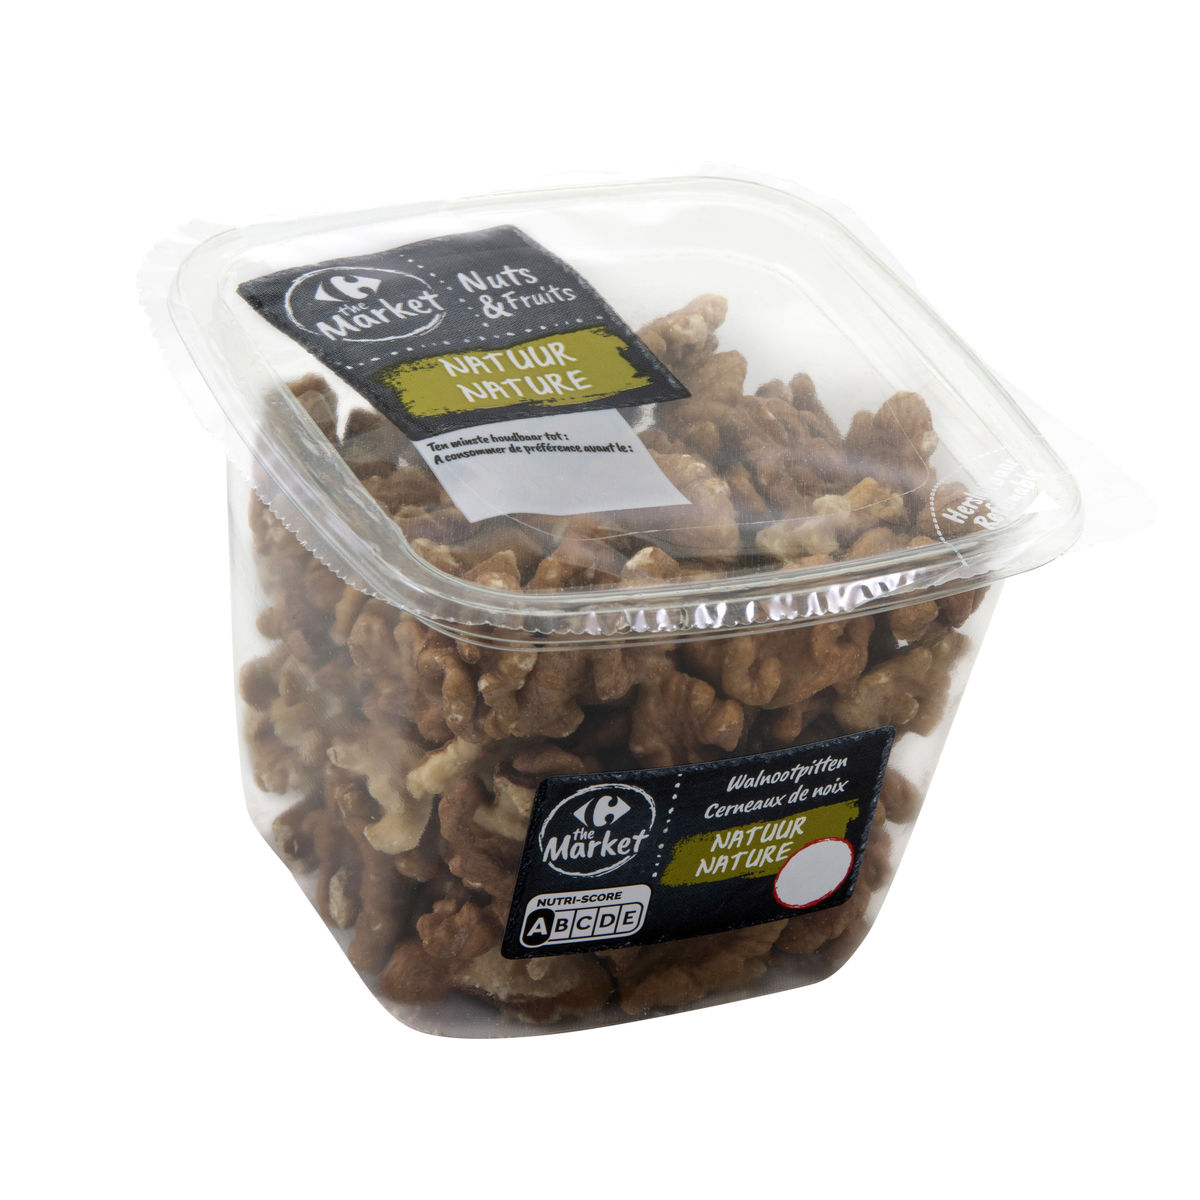 Carrefour The Market Nuts & Fruits Walnootpitten Natuur 150 g